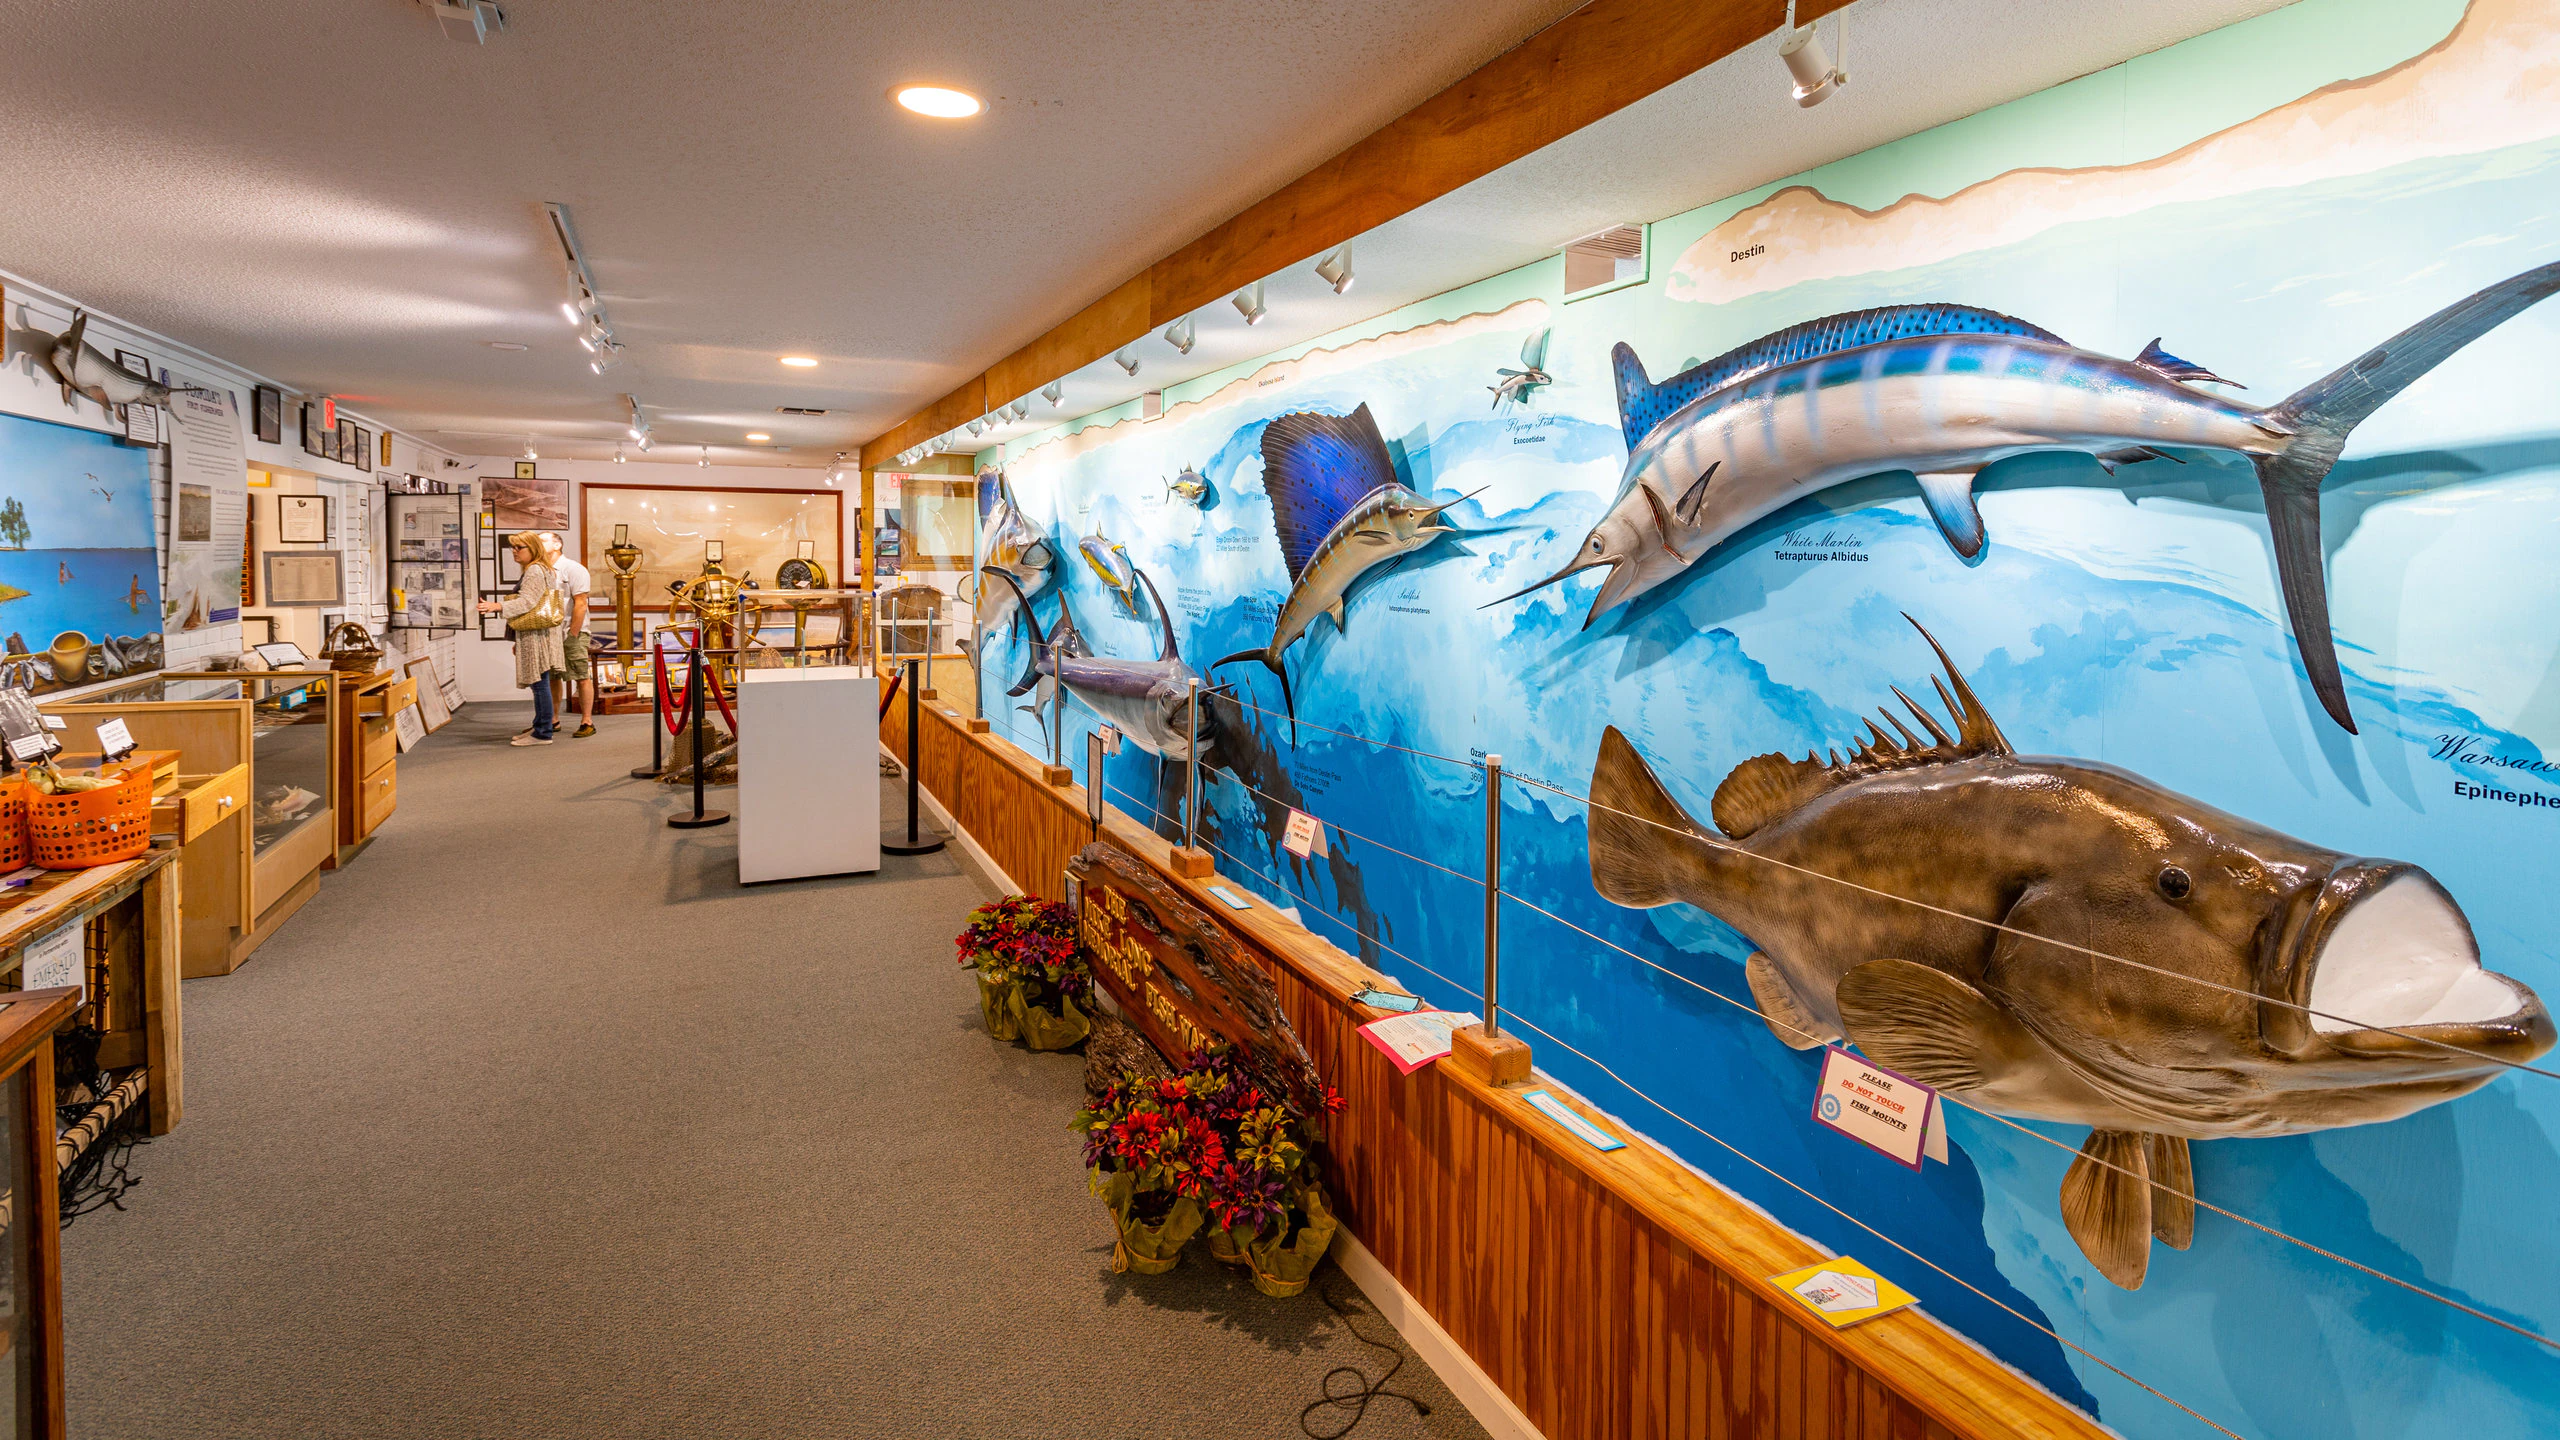 Destin History and Fishing Museum